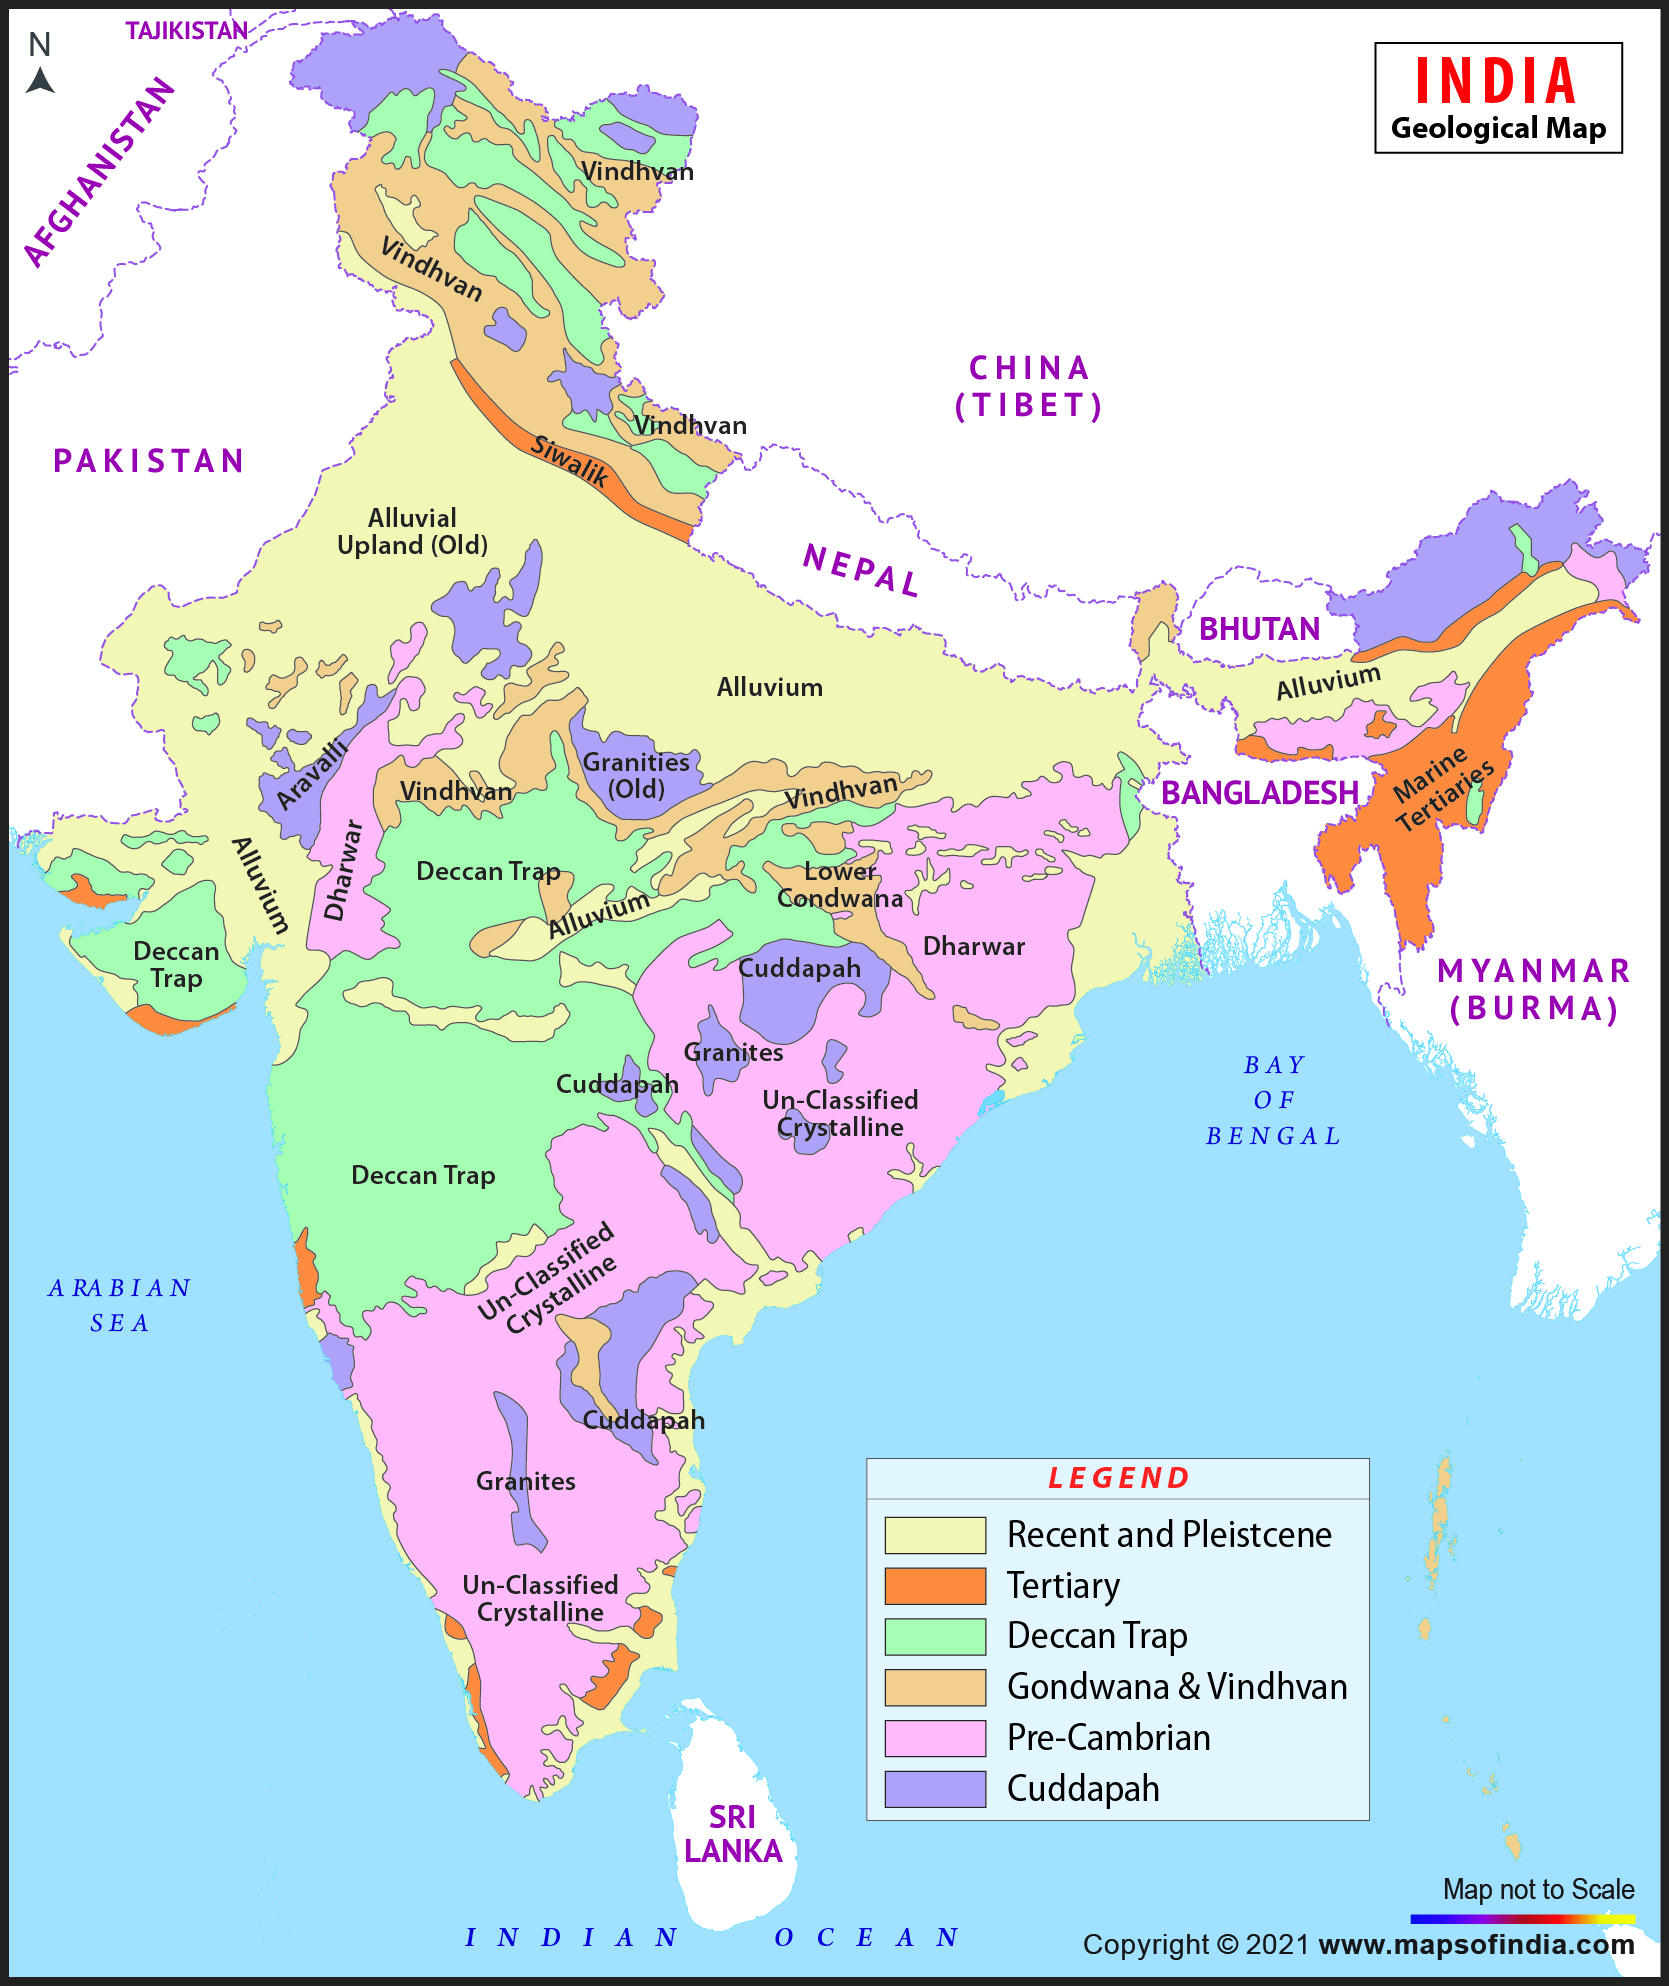 Geological map of India